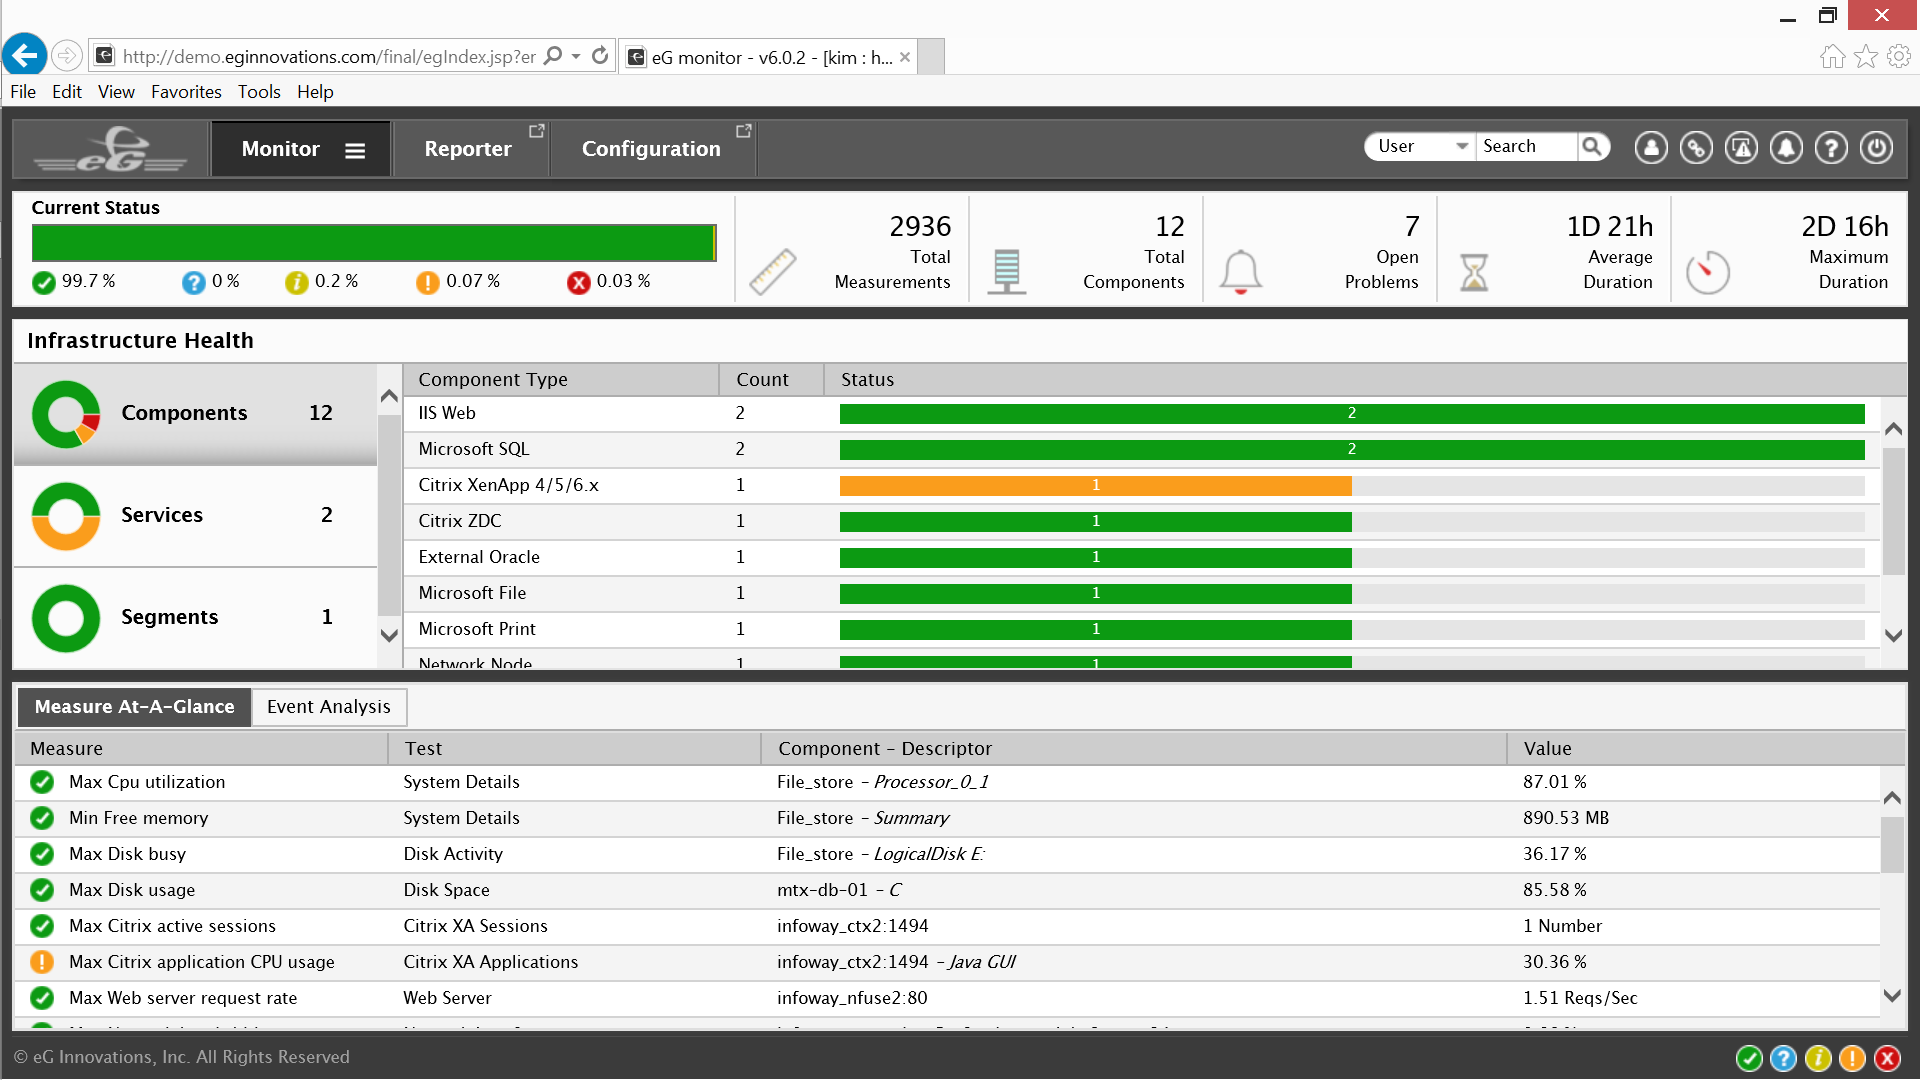 Quickly identify and resolve slow server response times using this monitoring dashboard from eG Innovations.